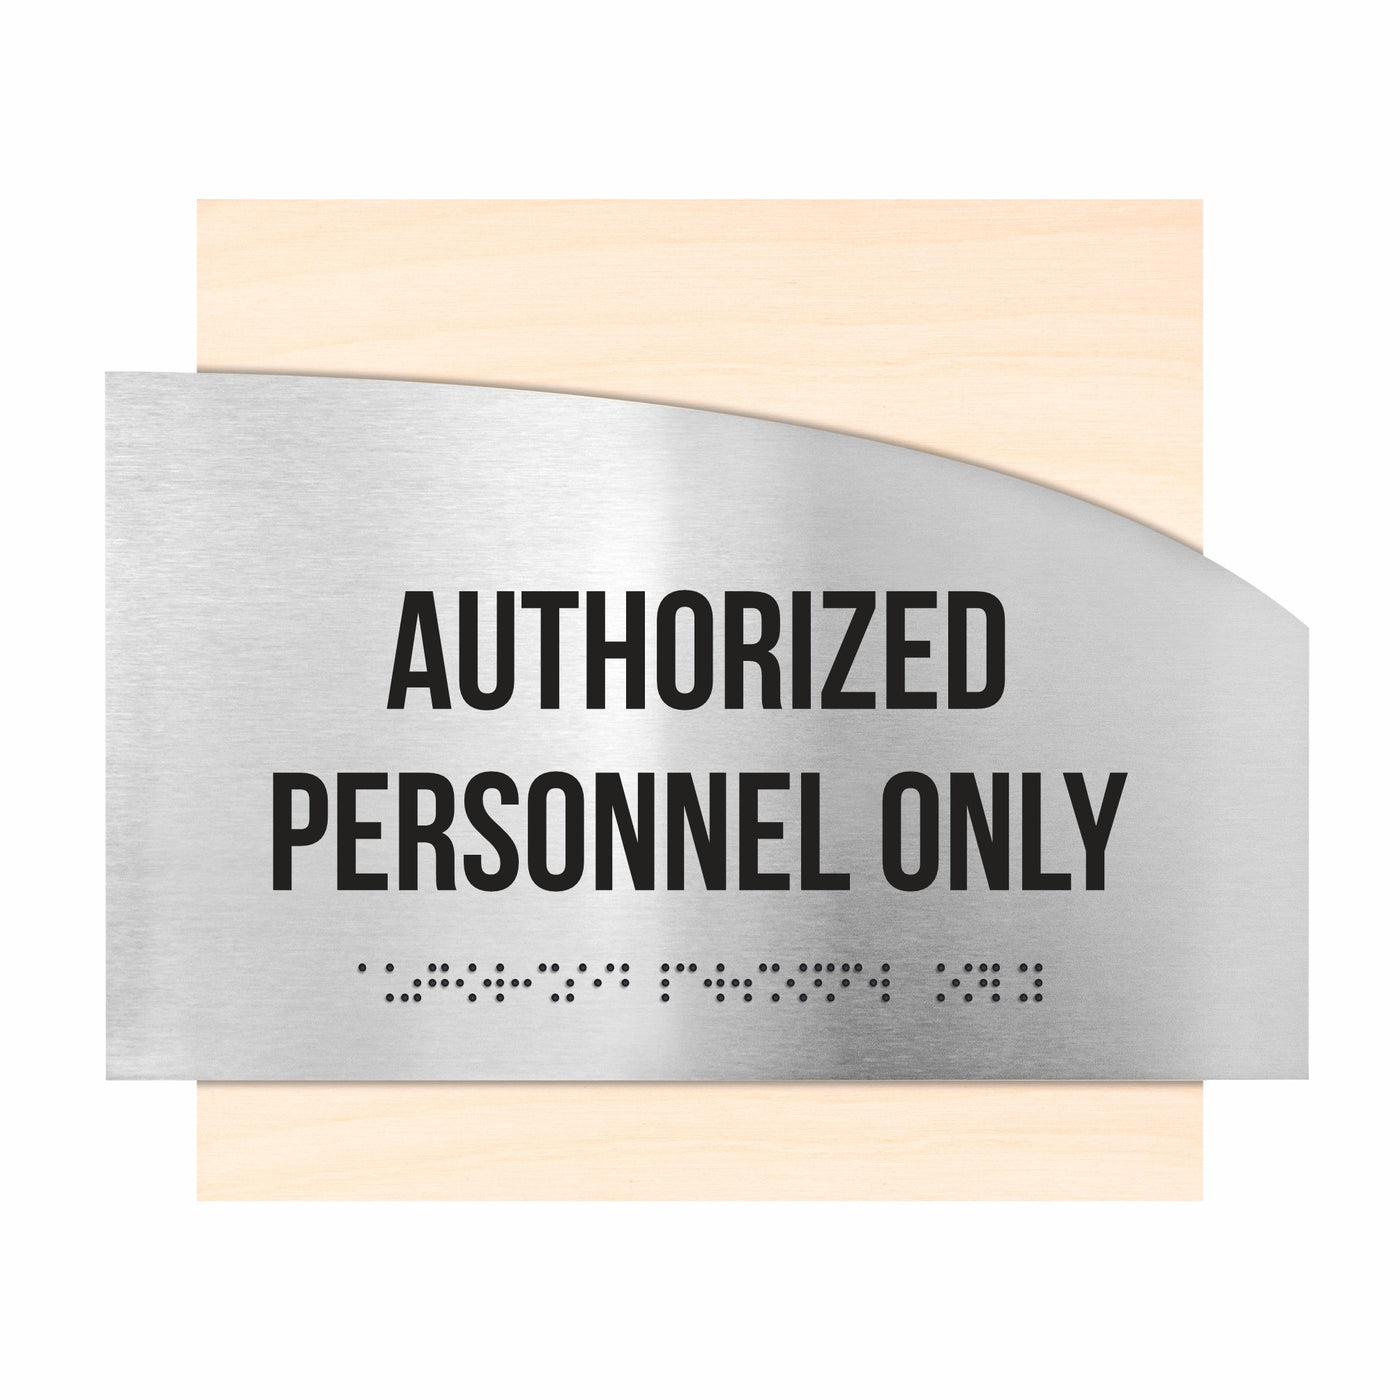 Door Signs - Authorized Personnel Only Signs - Stainless Steel & Wood - "Wave" Design